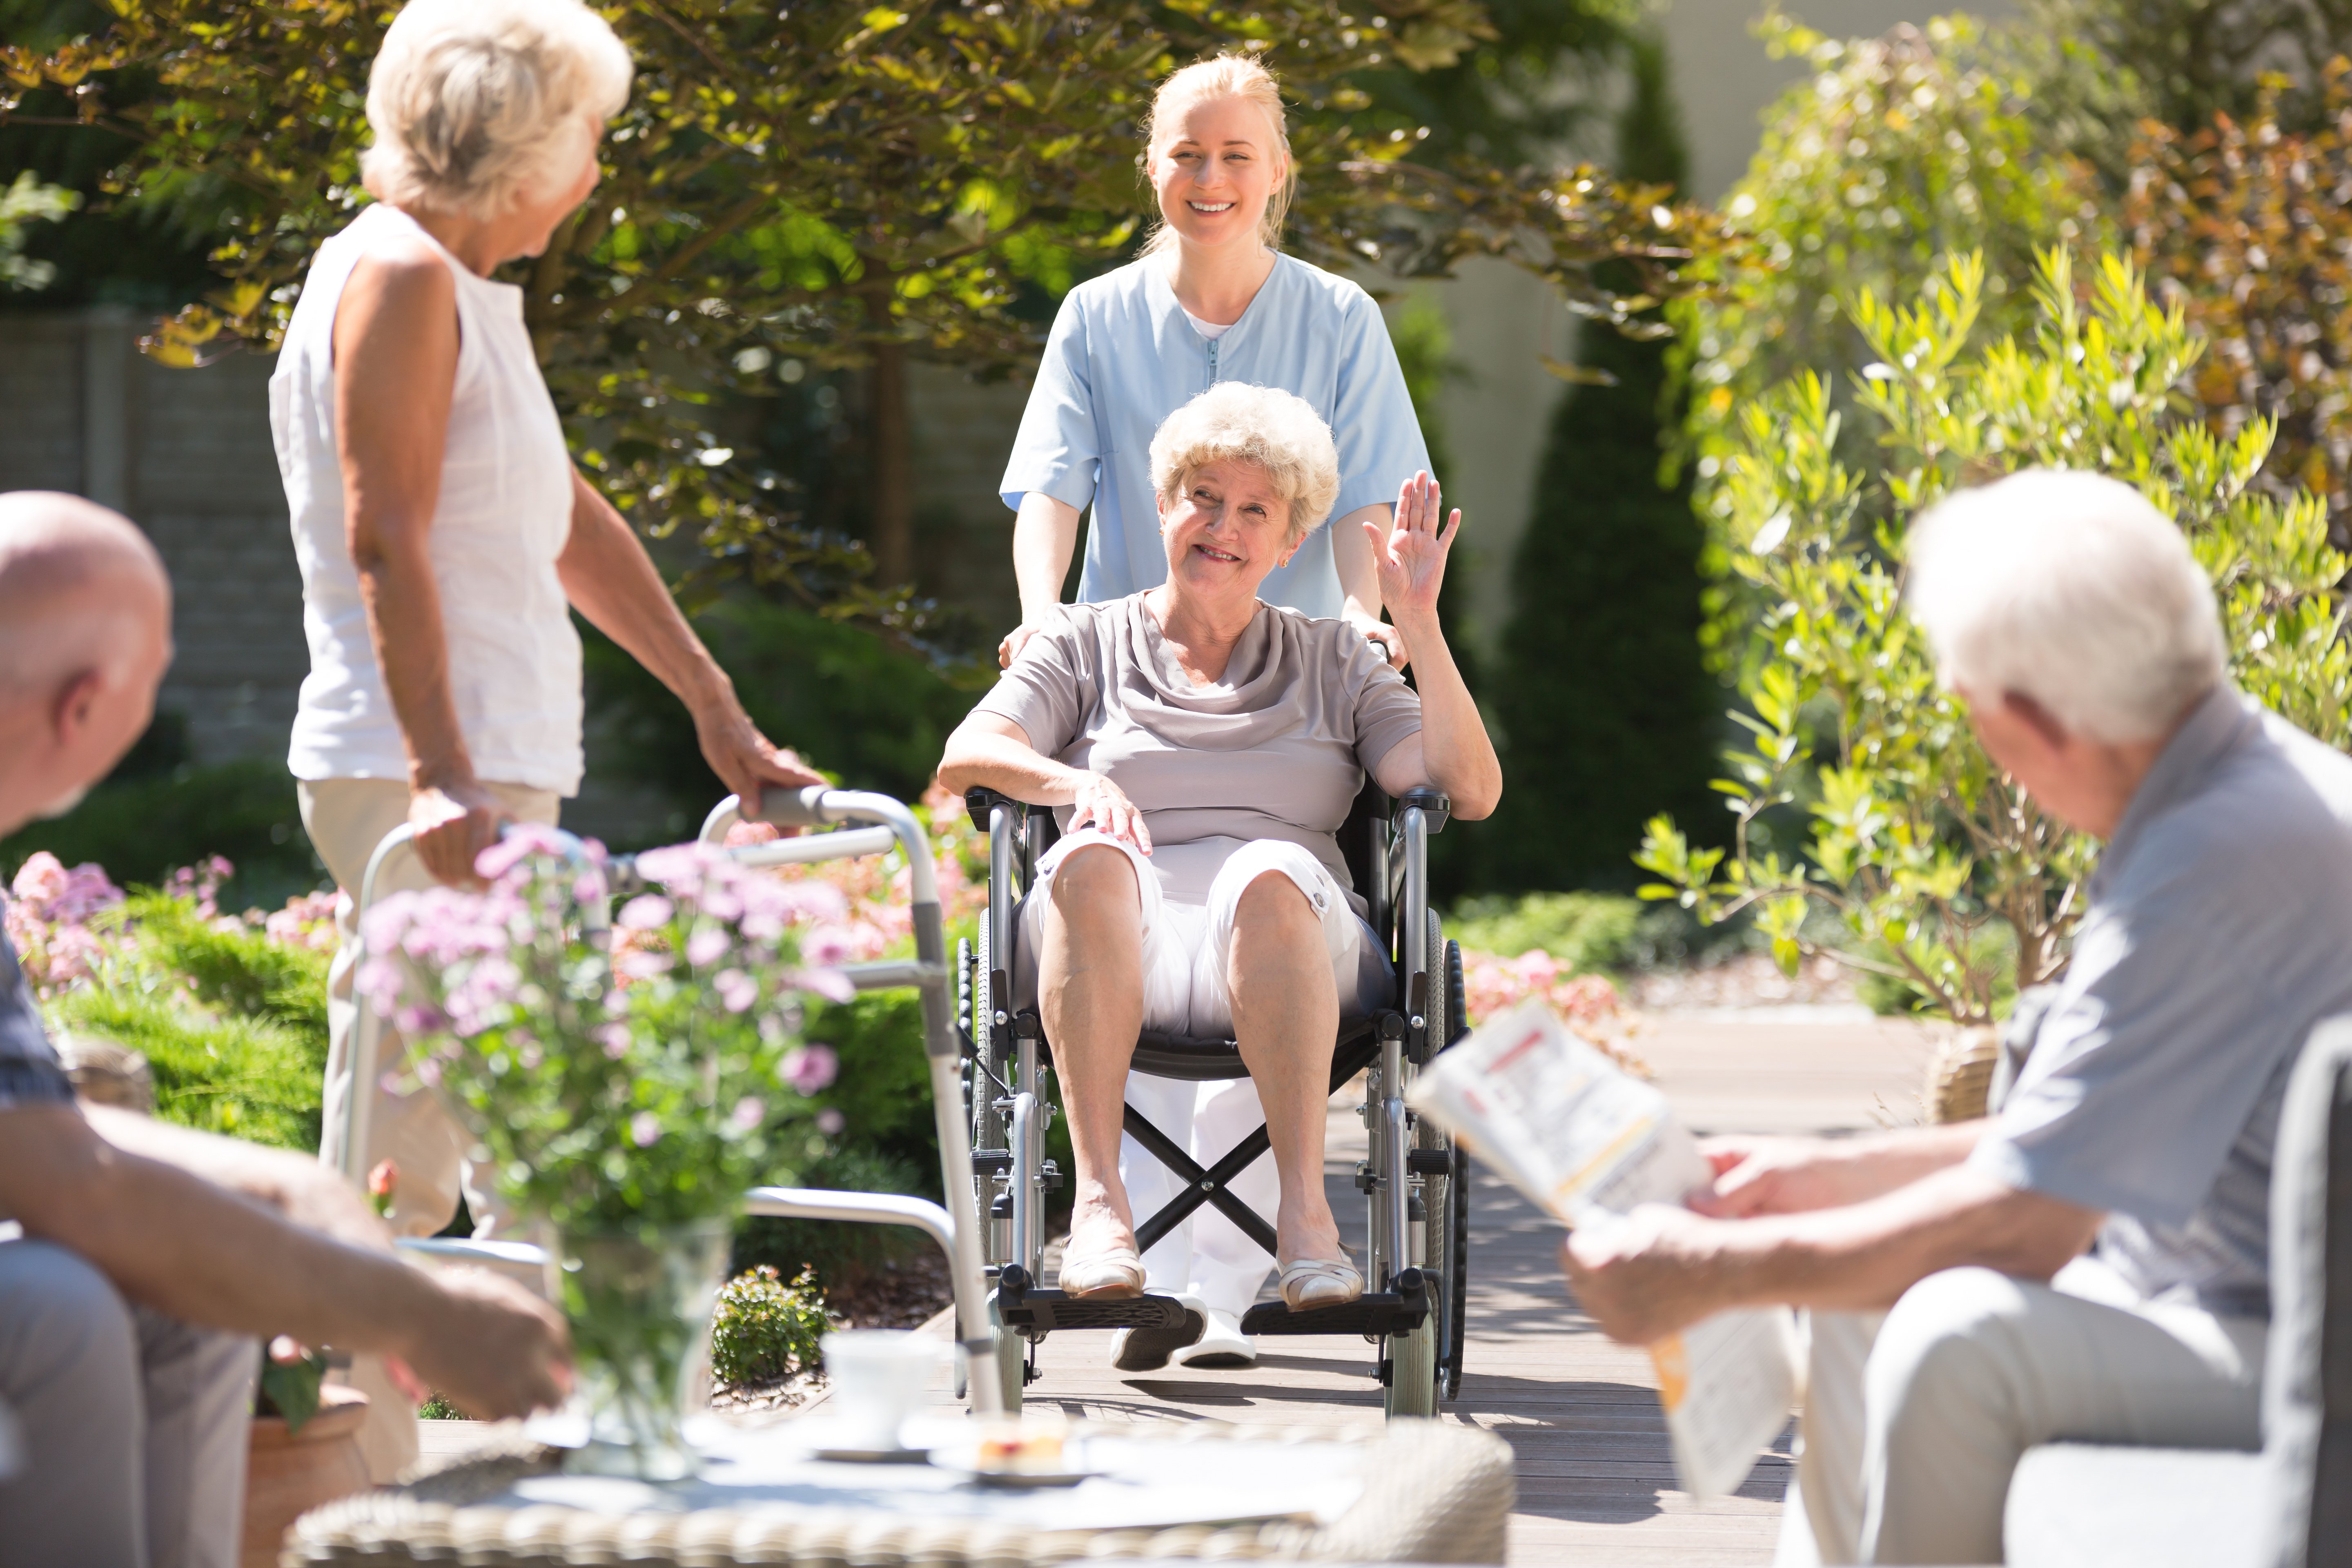 Bringing the Comfort of Nature into Assisted Living Facilities